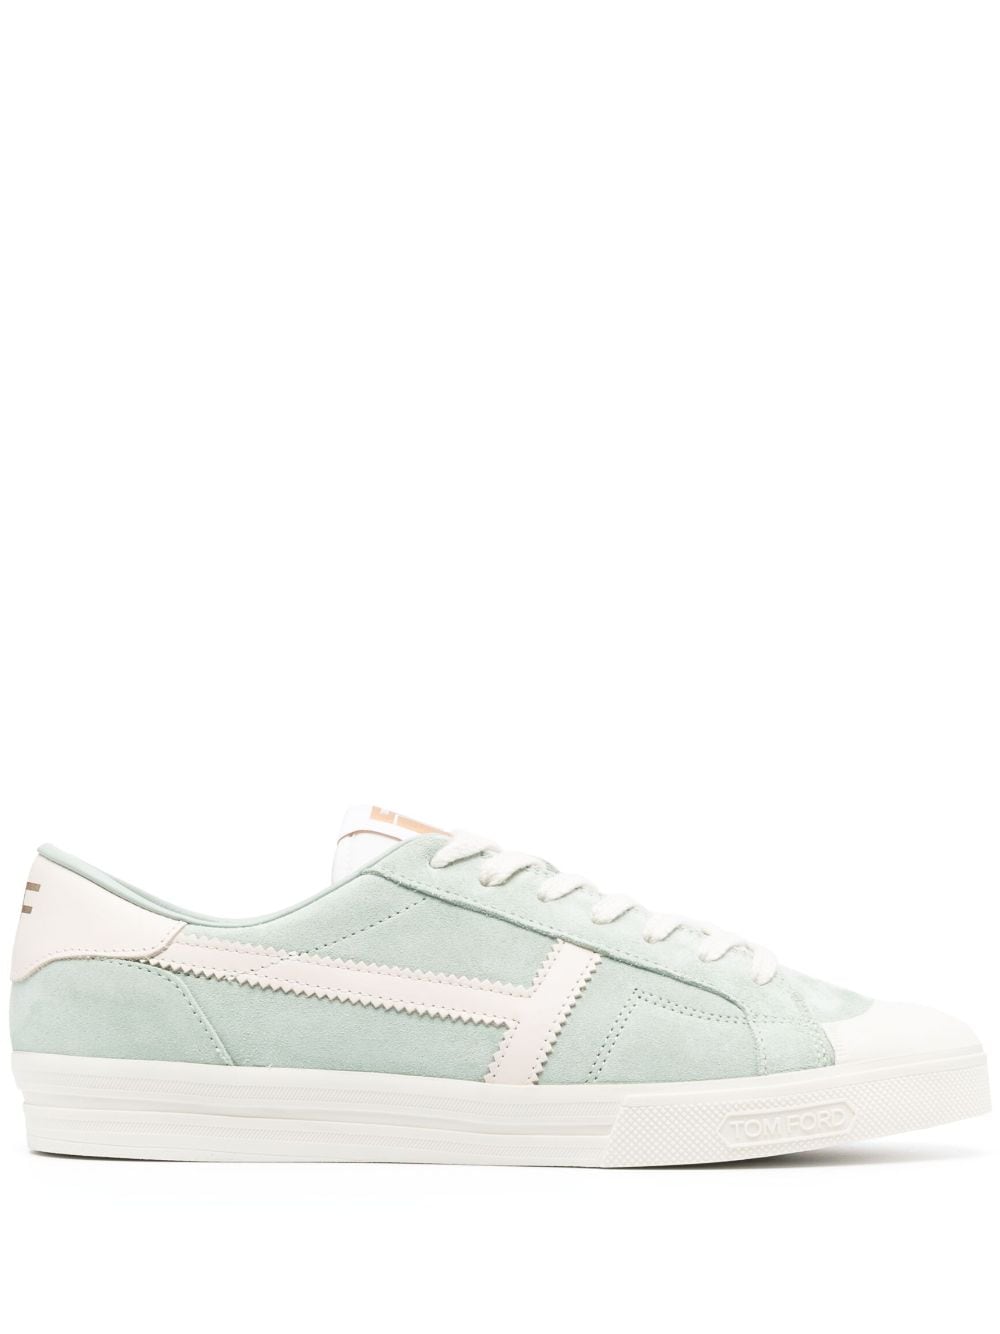 TOM FORD Warwick low-top sneakers - Green von TOM FORD